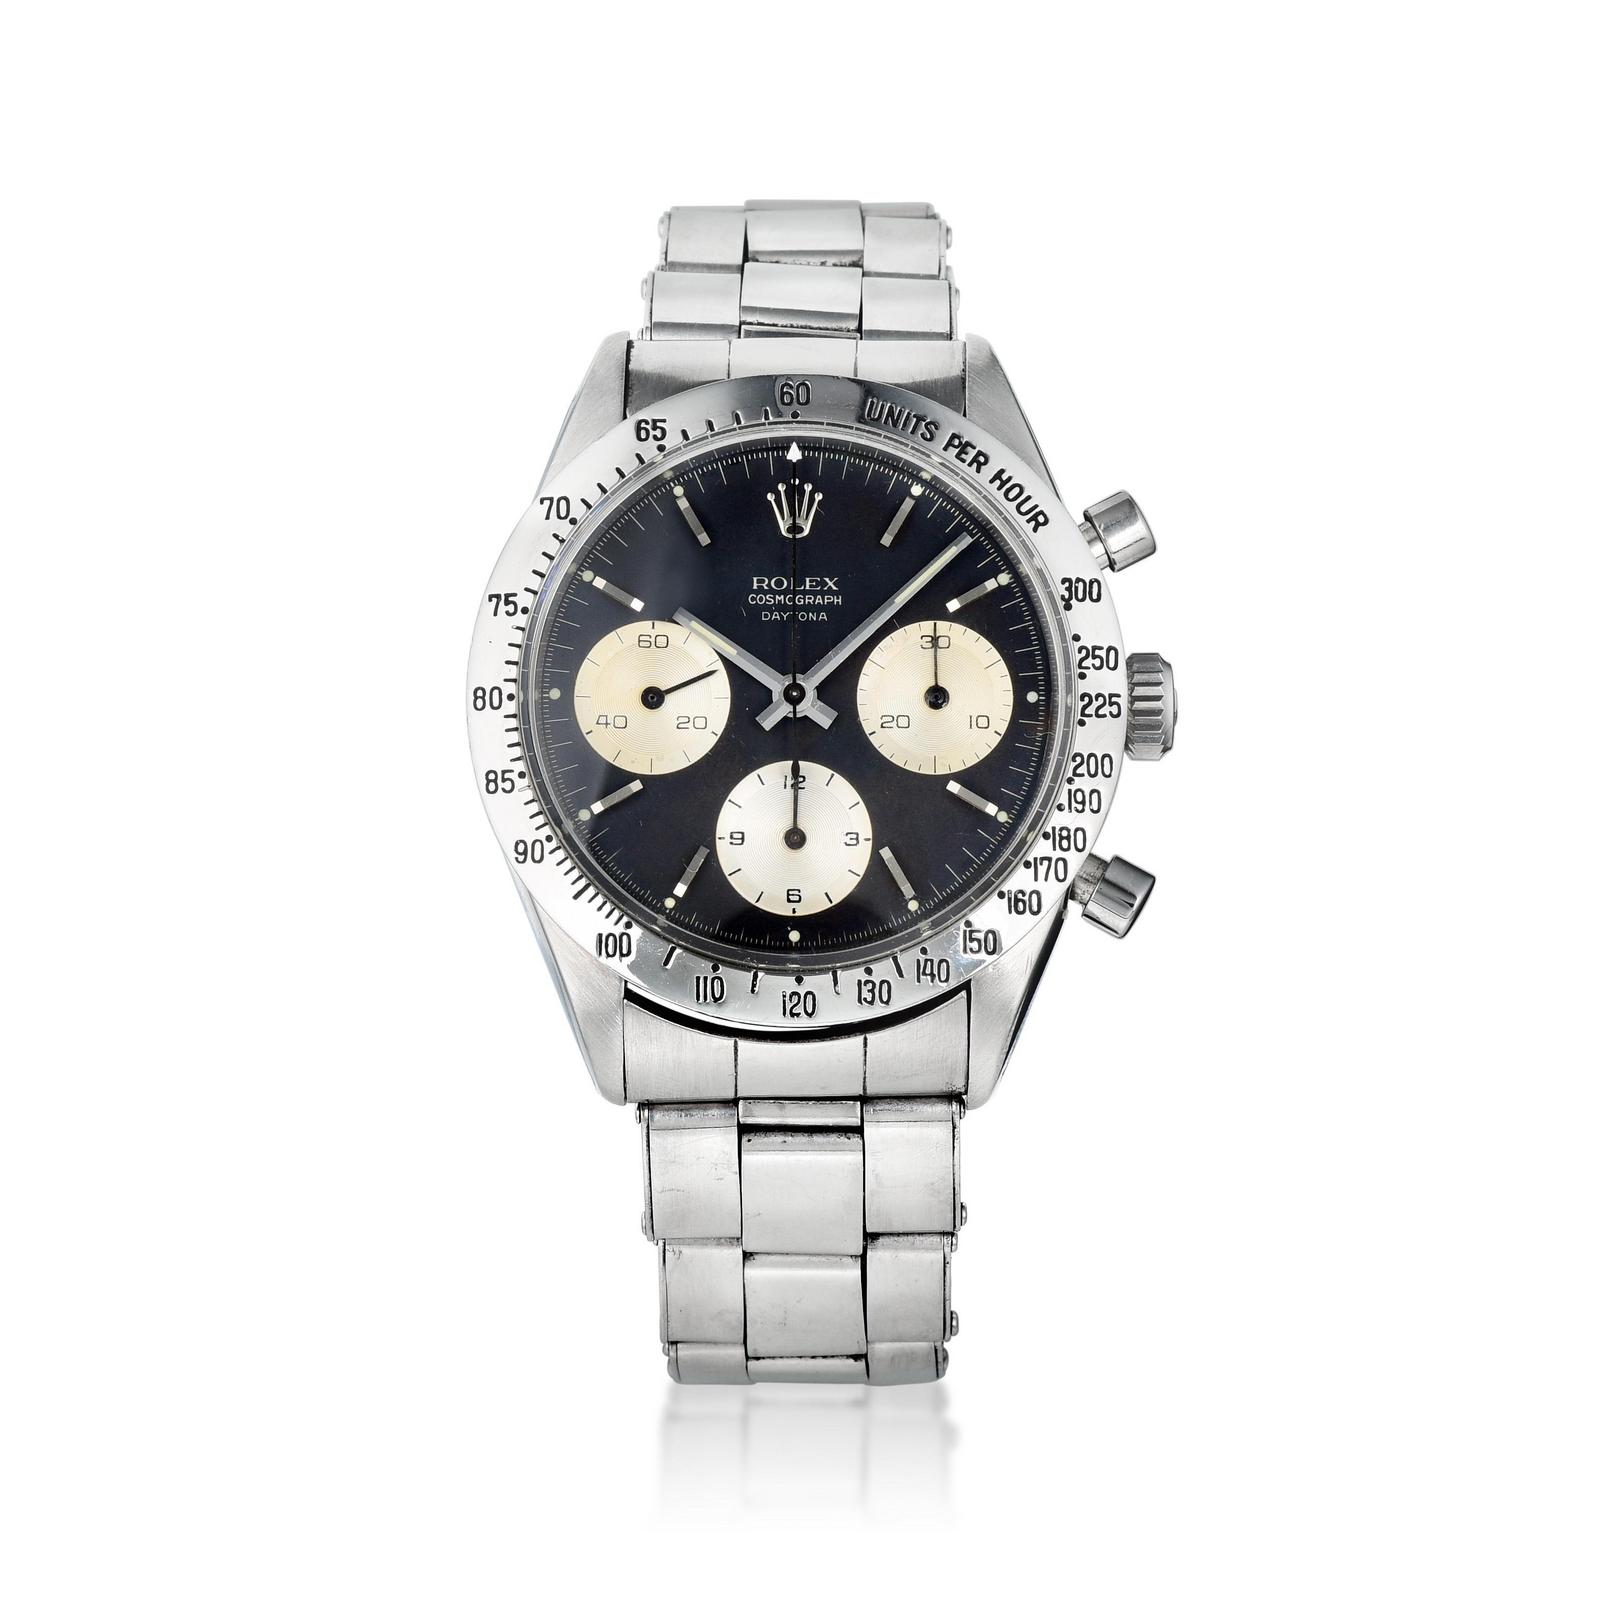 Vintage Rolex Daytona ref. in Steel | Fine Jewelry Auctions and Appraisers